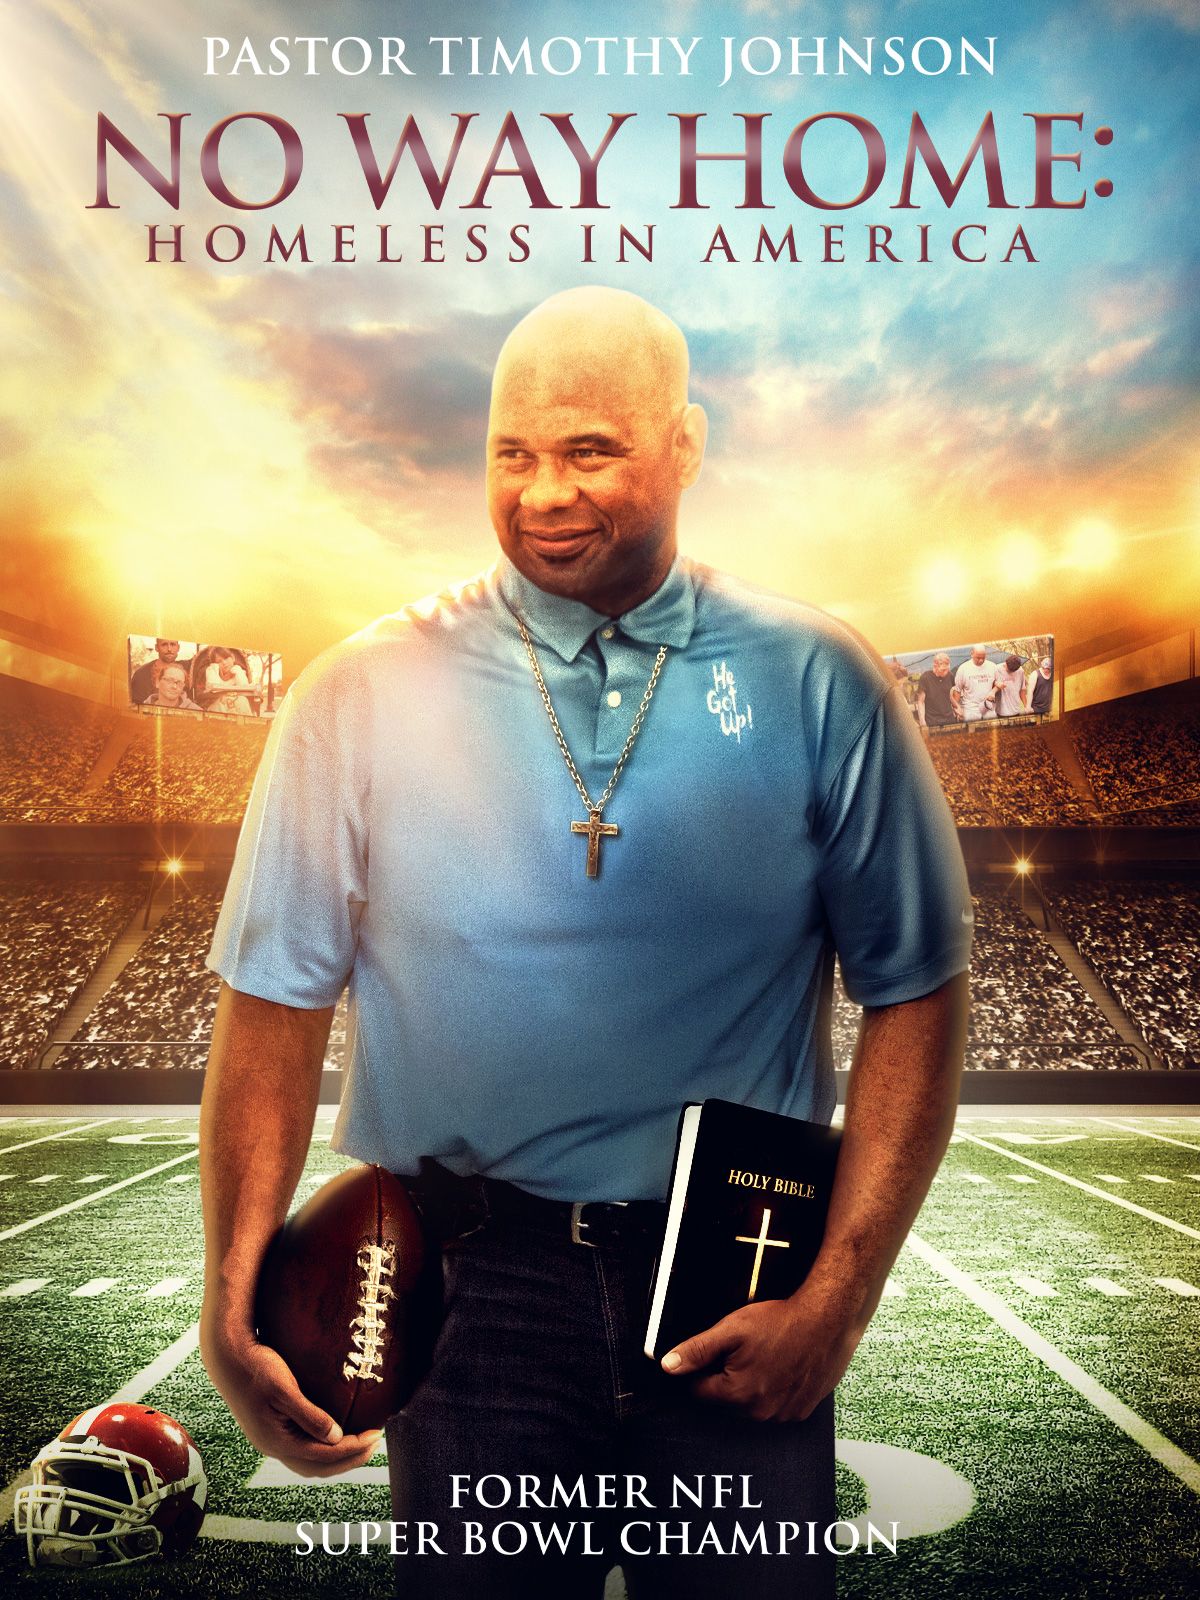 Keyart for the movie No Way Home: Homeless in America